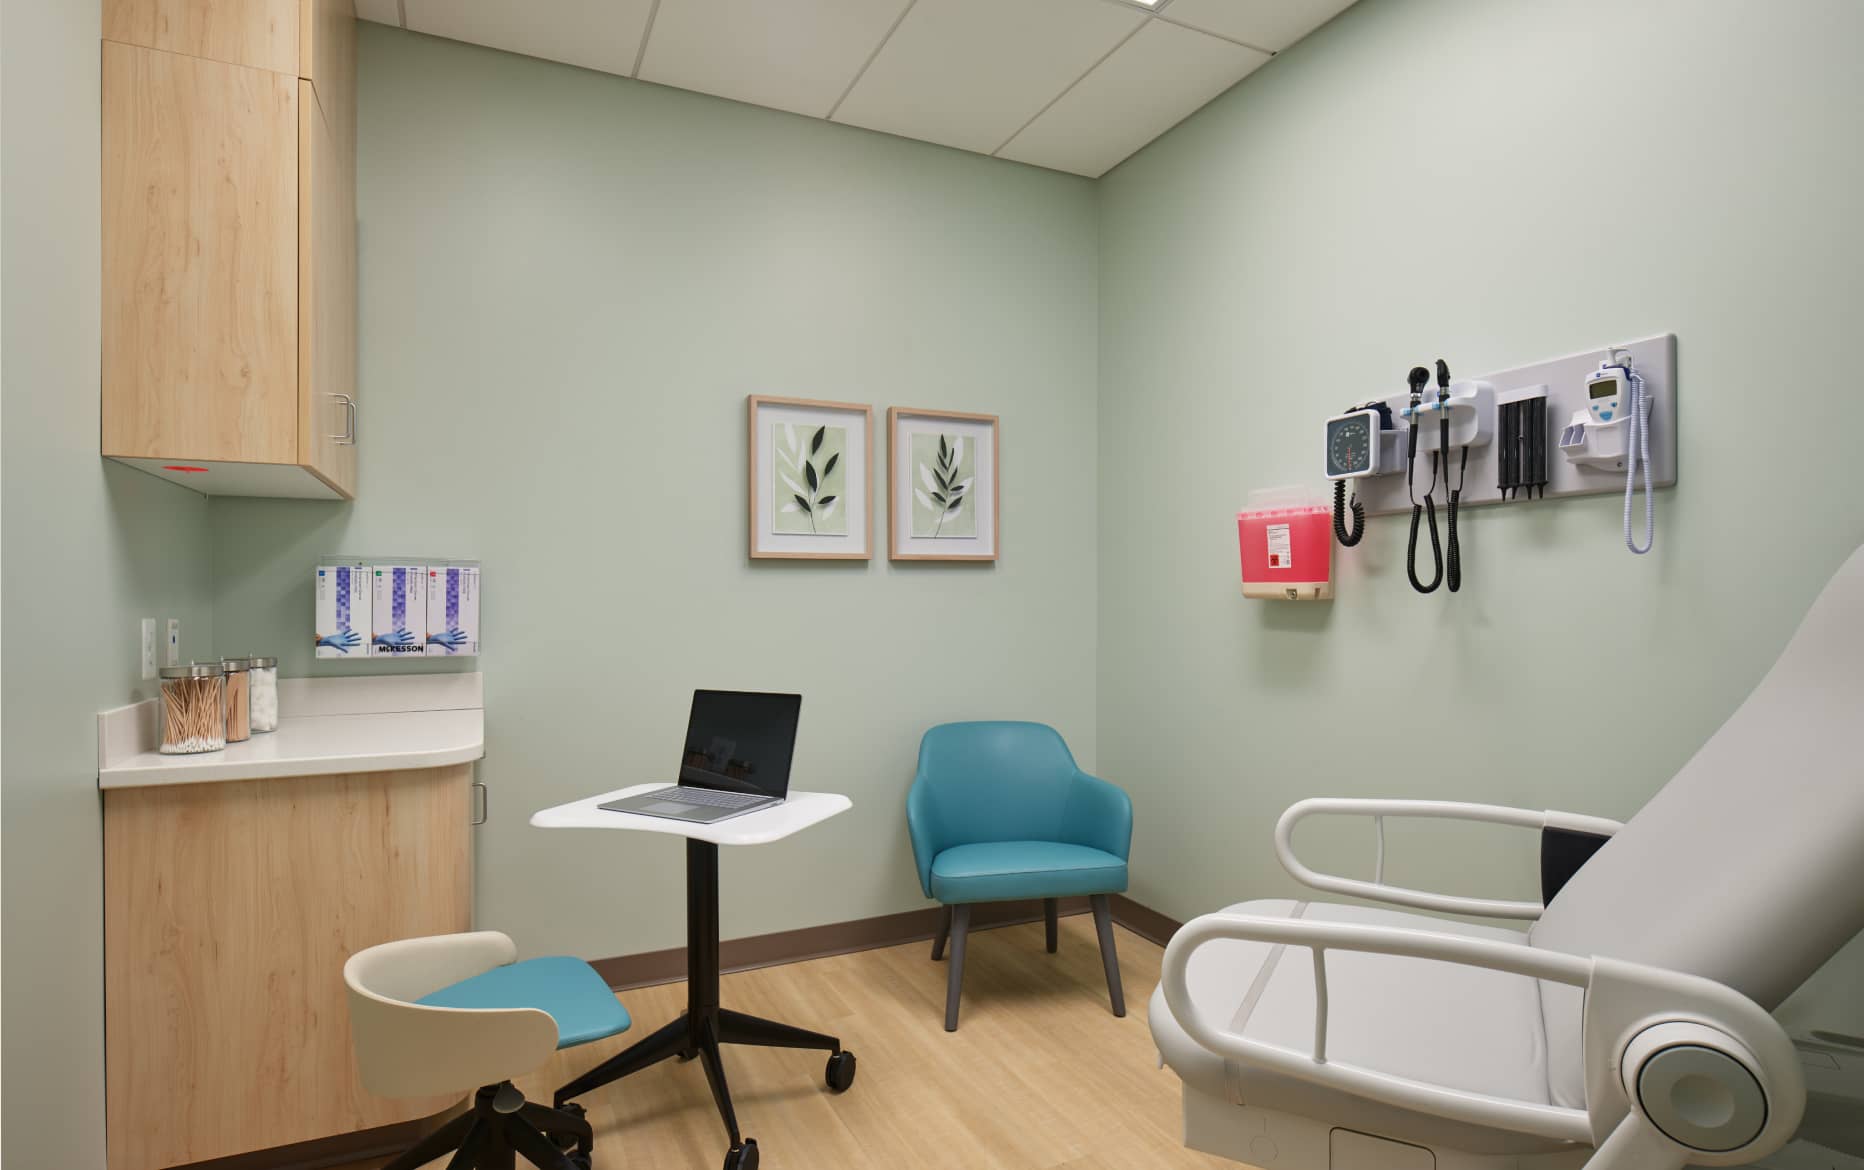 A clean, modern medical examination room with a laptop on a movable desk, a teal chair, an examination bed, wall-mounted medical tools, and minimal decor.